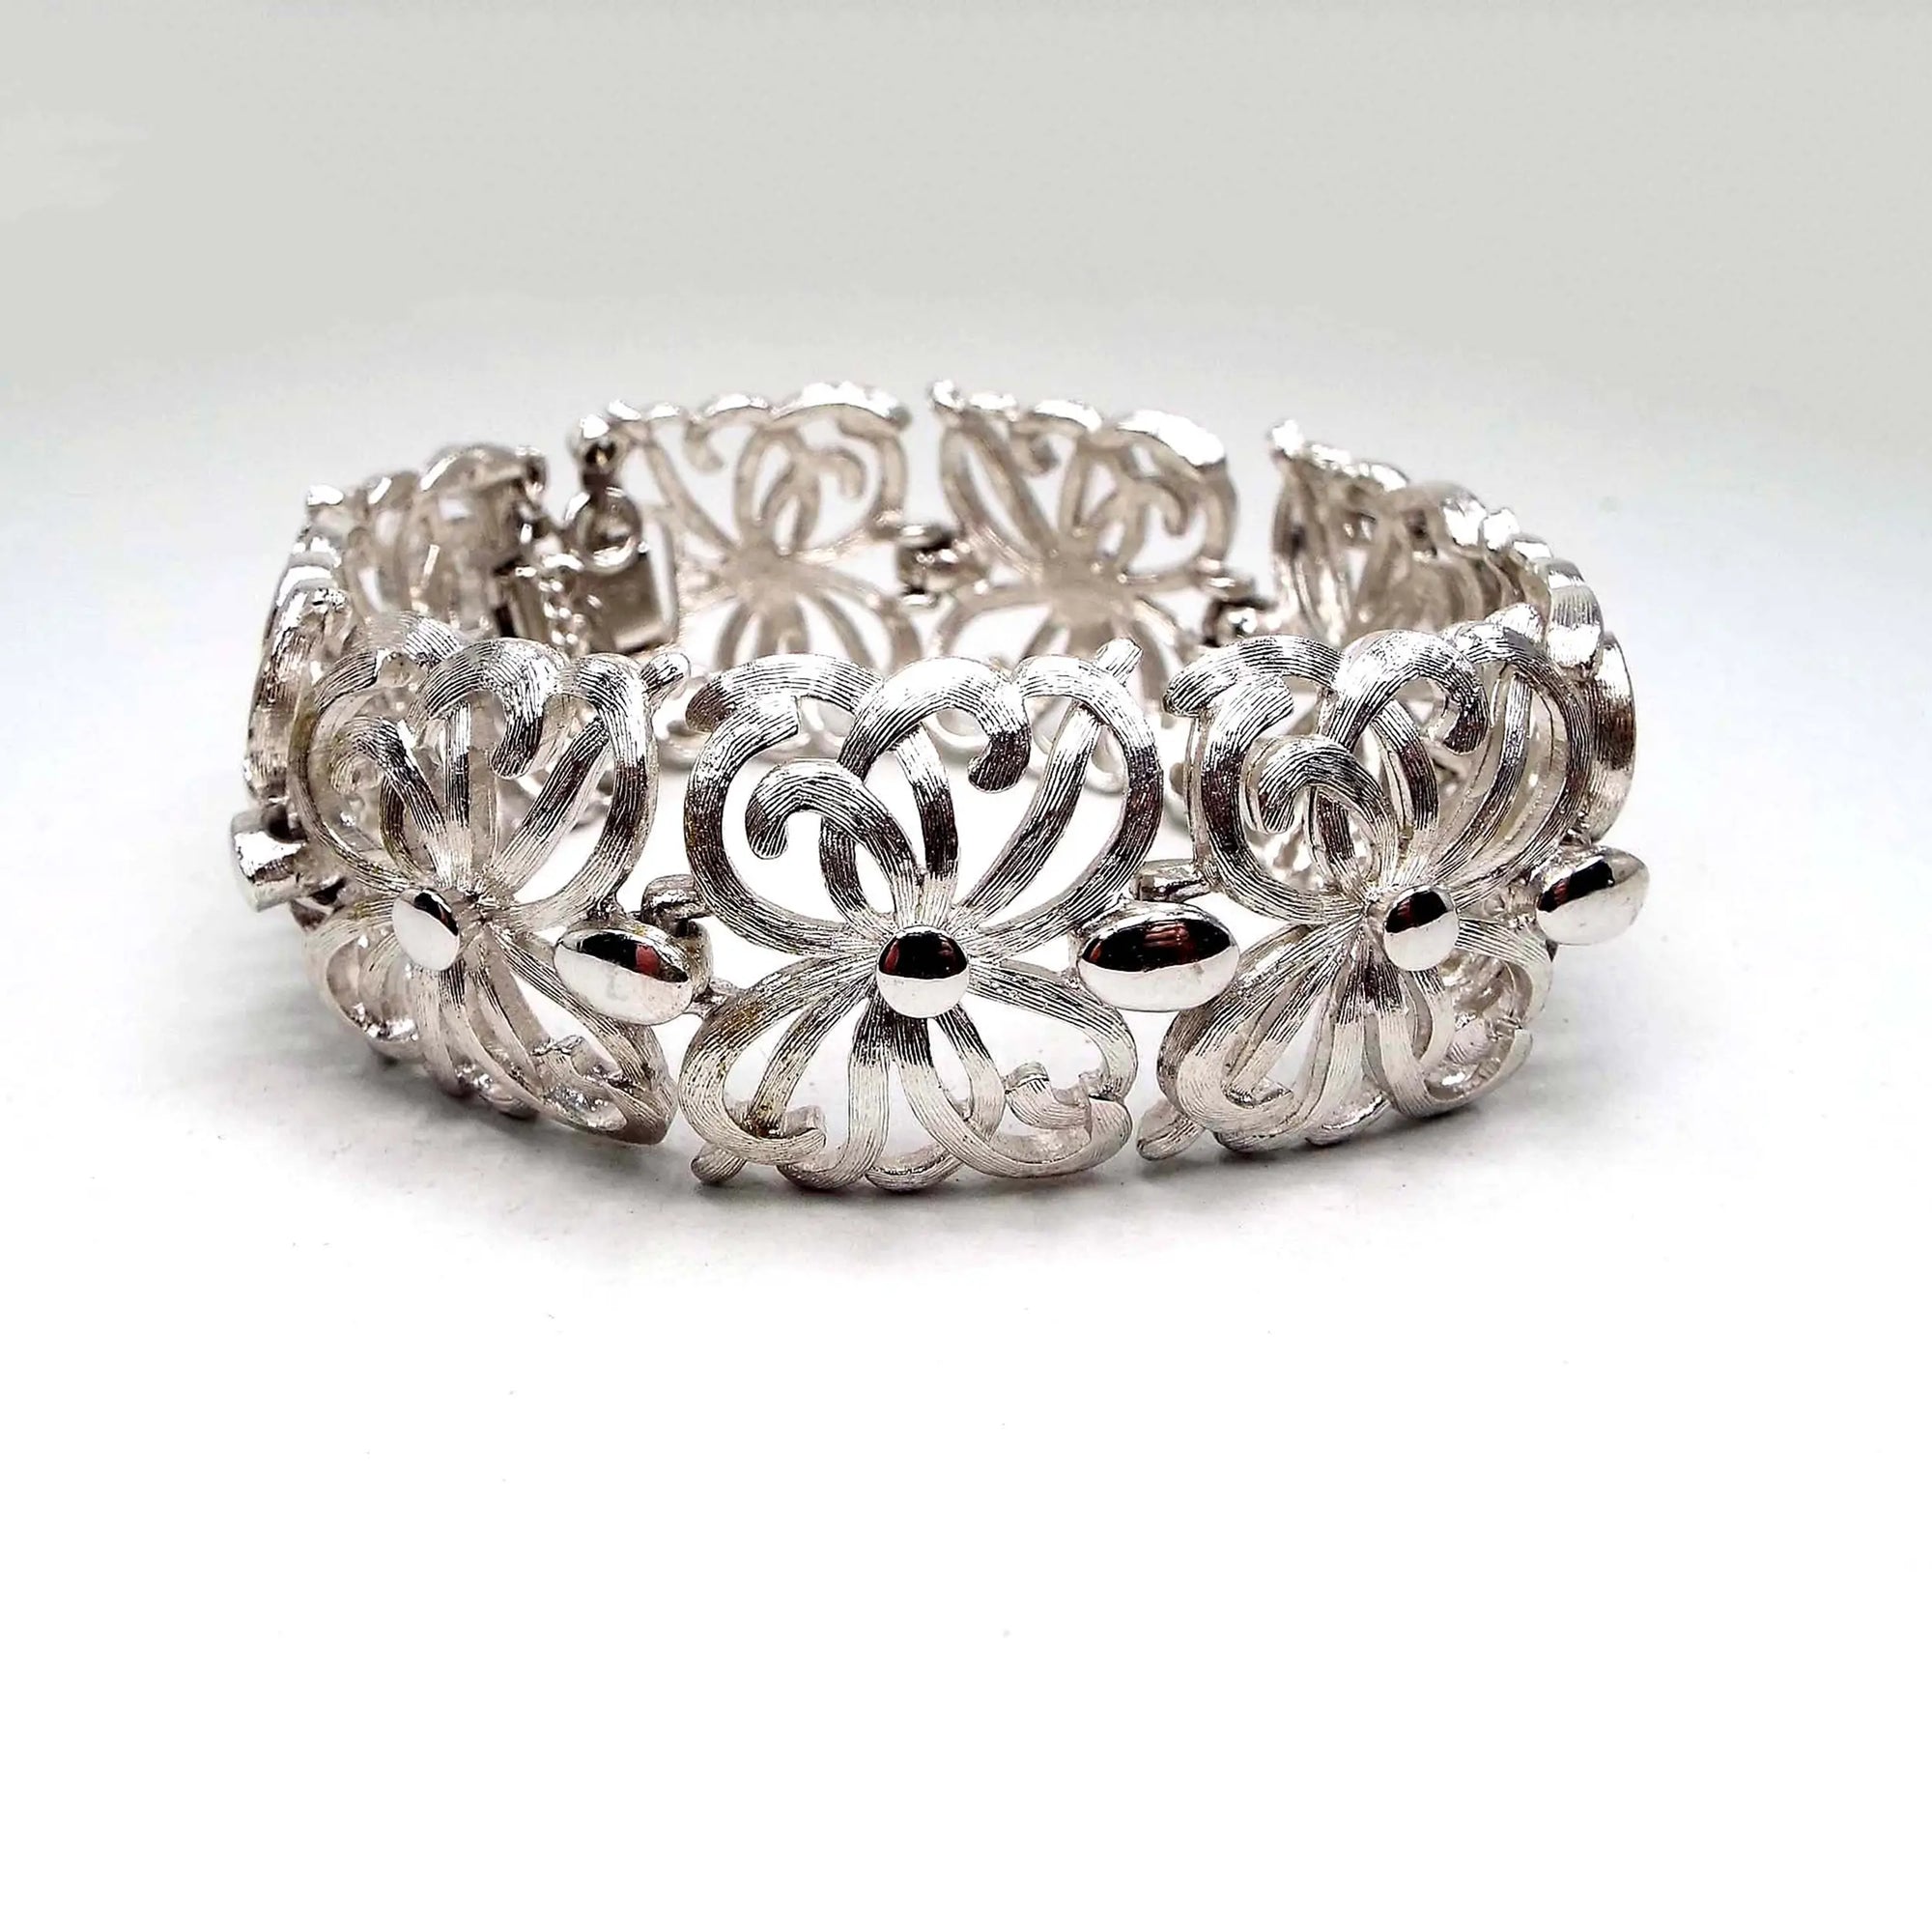 Angled front view of the Mid Century vintage Monet link bracelet. It is silver tone in color and has wide filigree links with a curvy floral like pattern. Most of the bracelet is textured matte metal. There is a snap lock clasp and safety chain on the end.